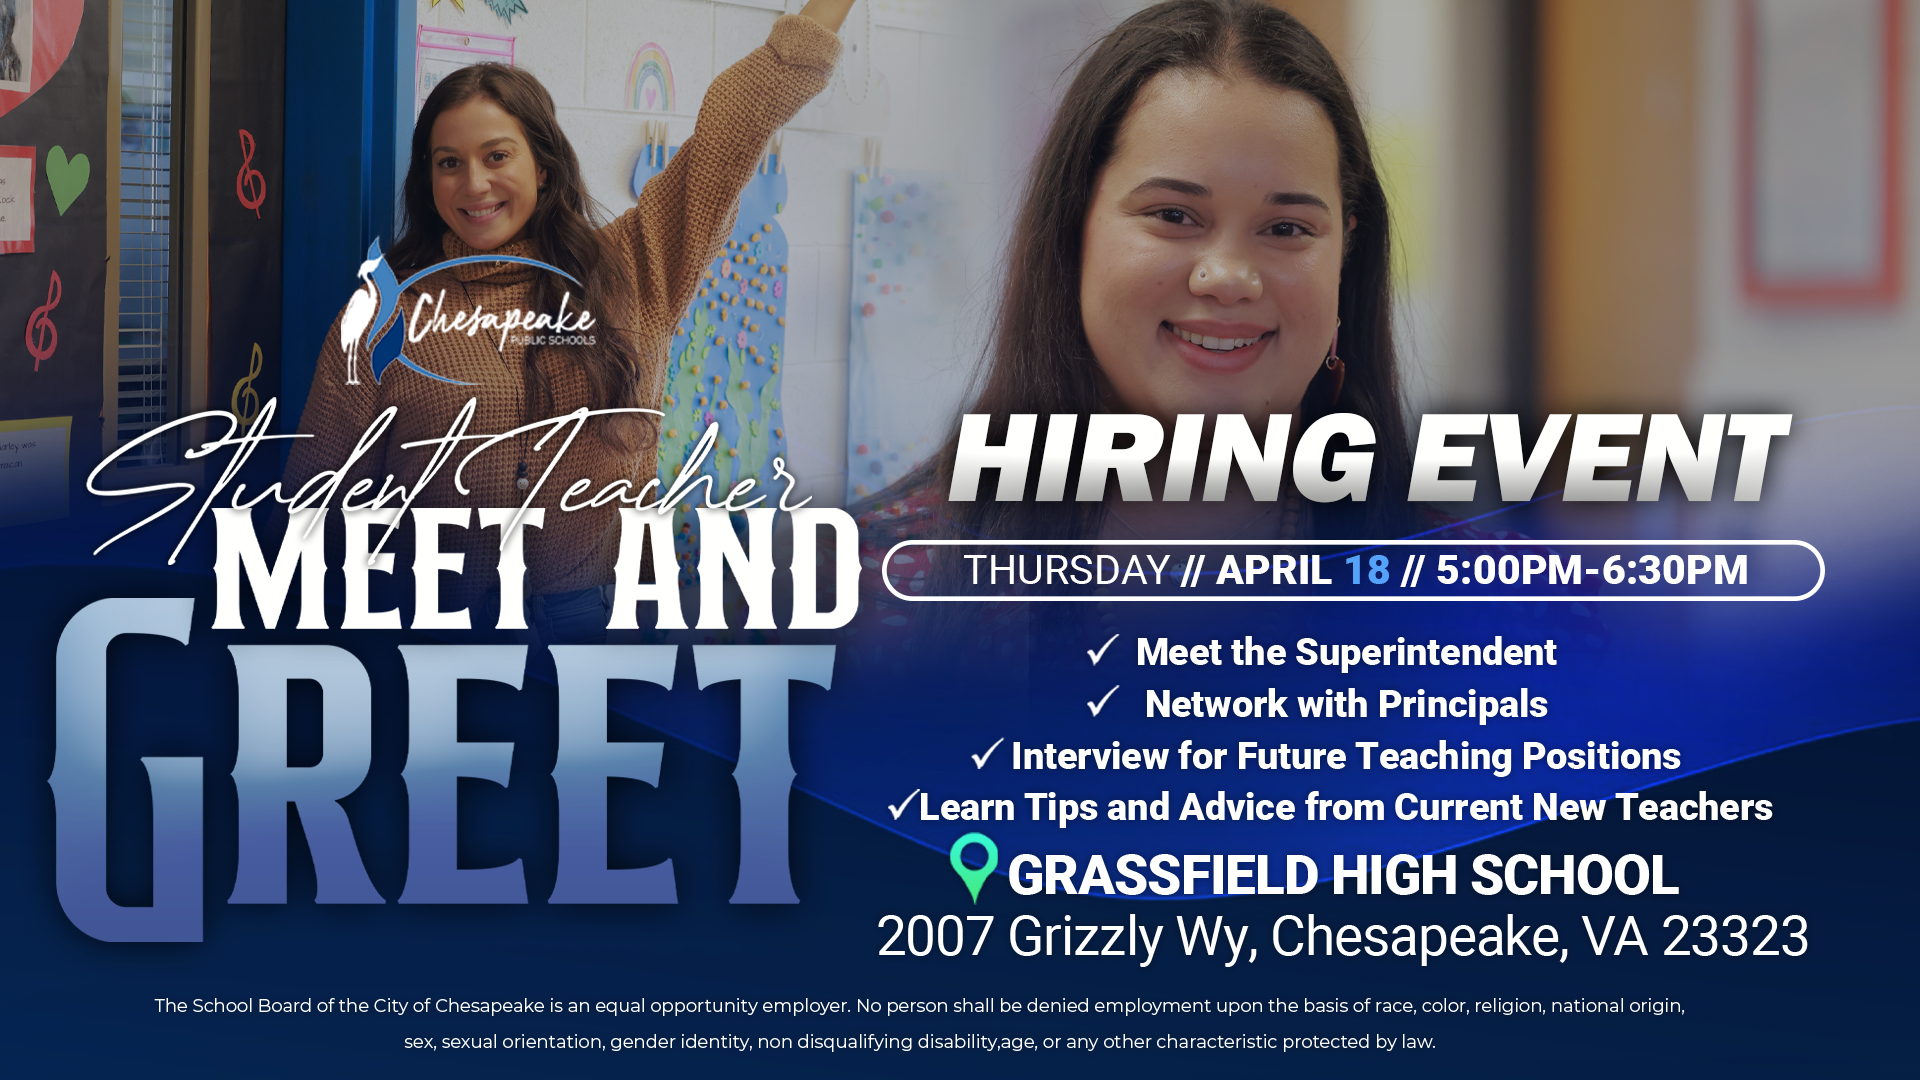 Hiring and Networking Event marketing graphic featuring two candid photos of student teachers. Full details of the text are outlined in this calendar event: https://www.cpschools.com/events?id=27059213